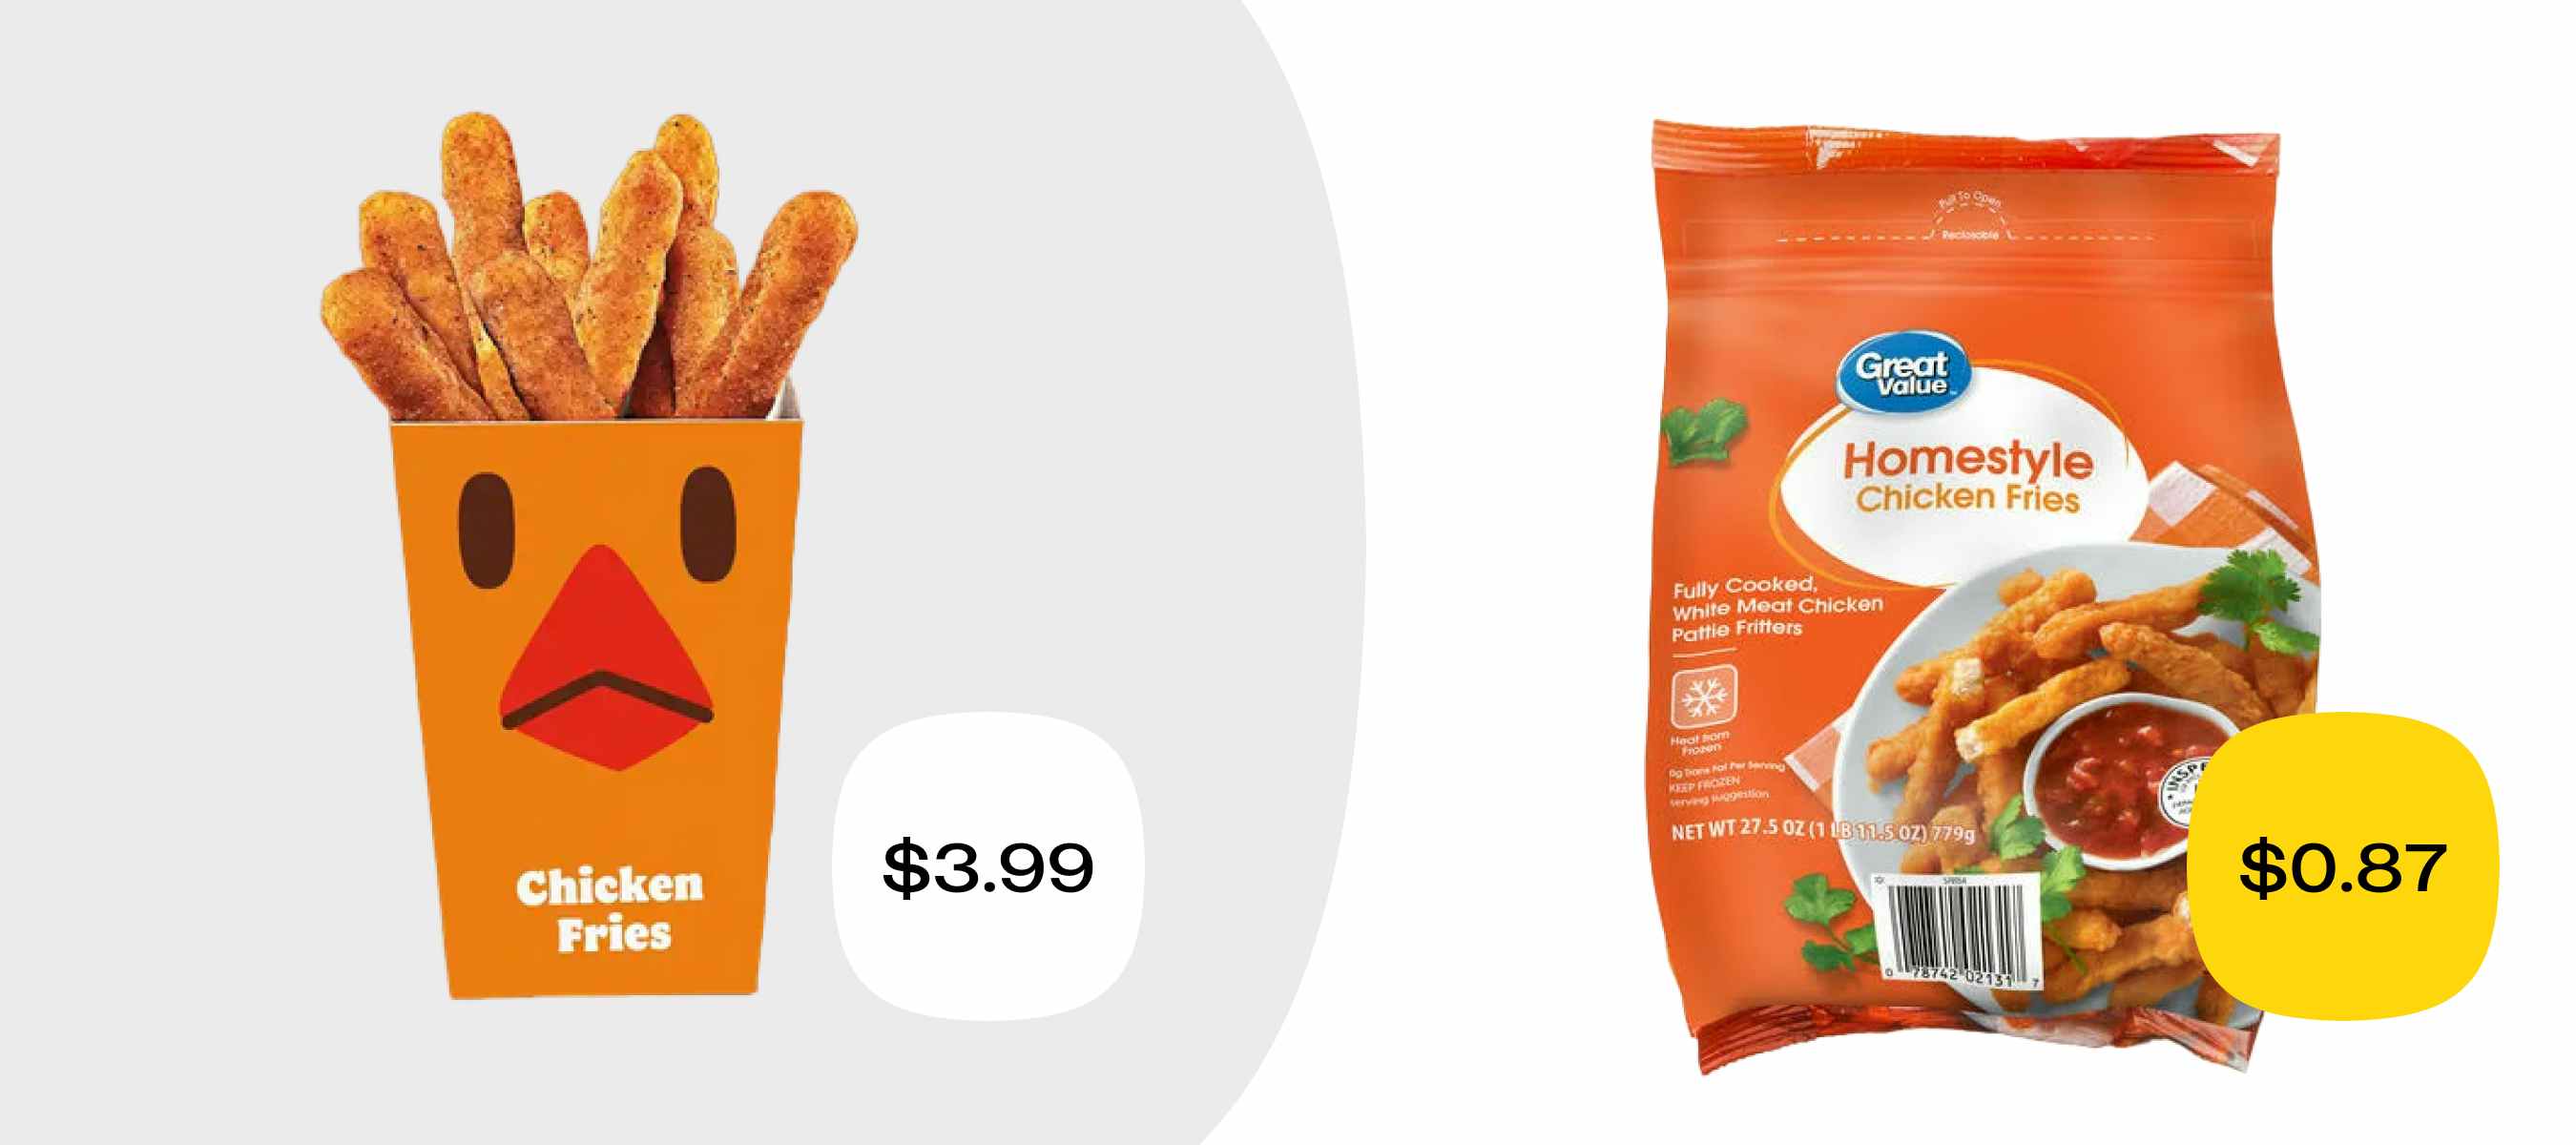 burger king chicken fries for $3.99 versus a similar item from walmart for $0.87